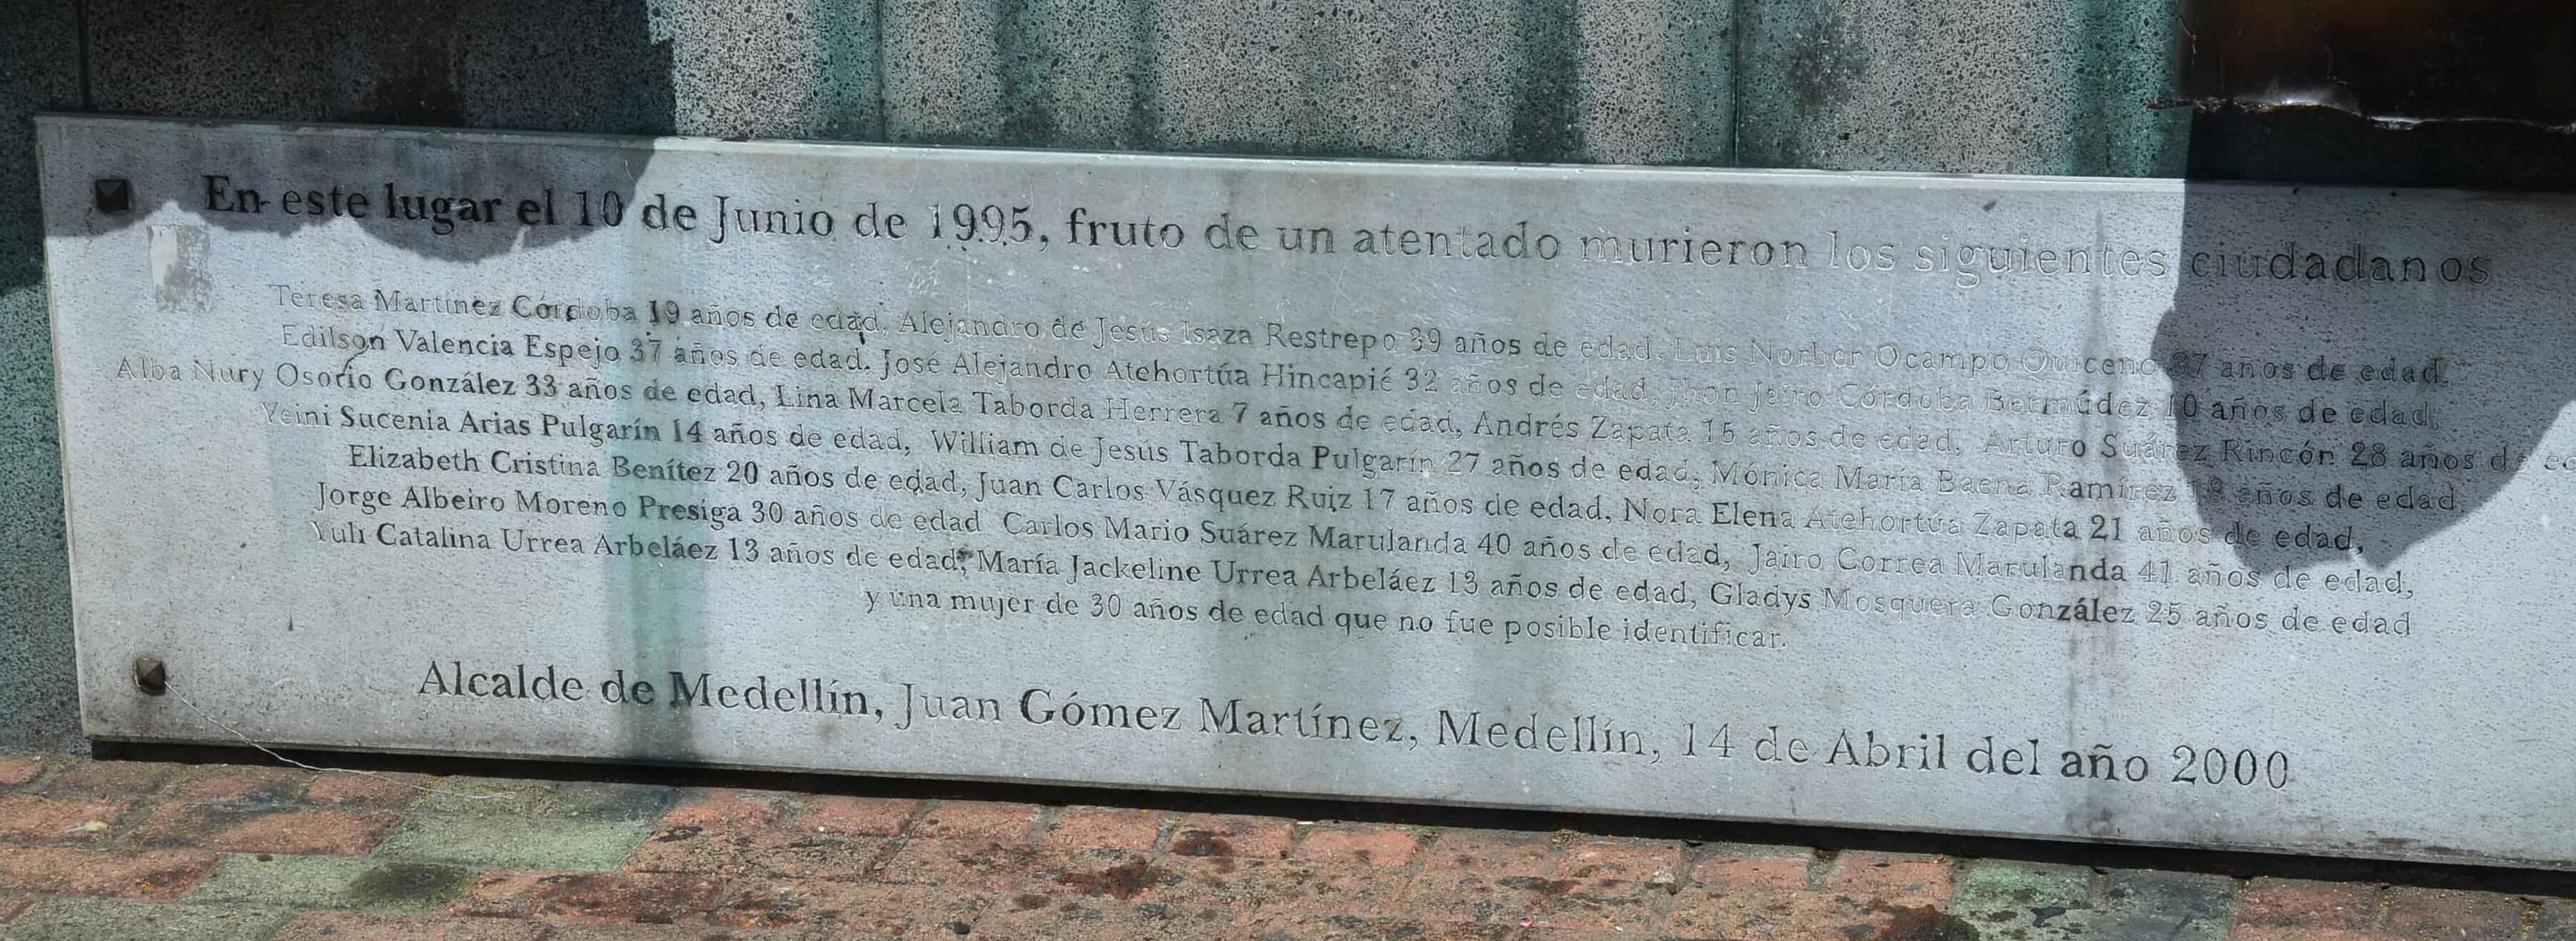 Dedication on the base of the bombed out Botero sculpture